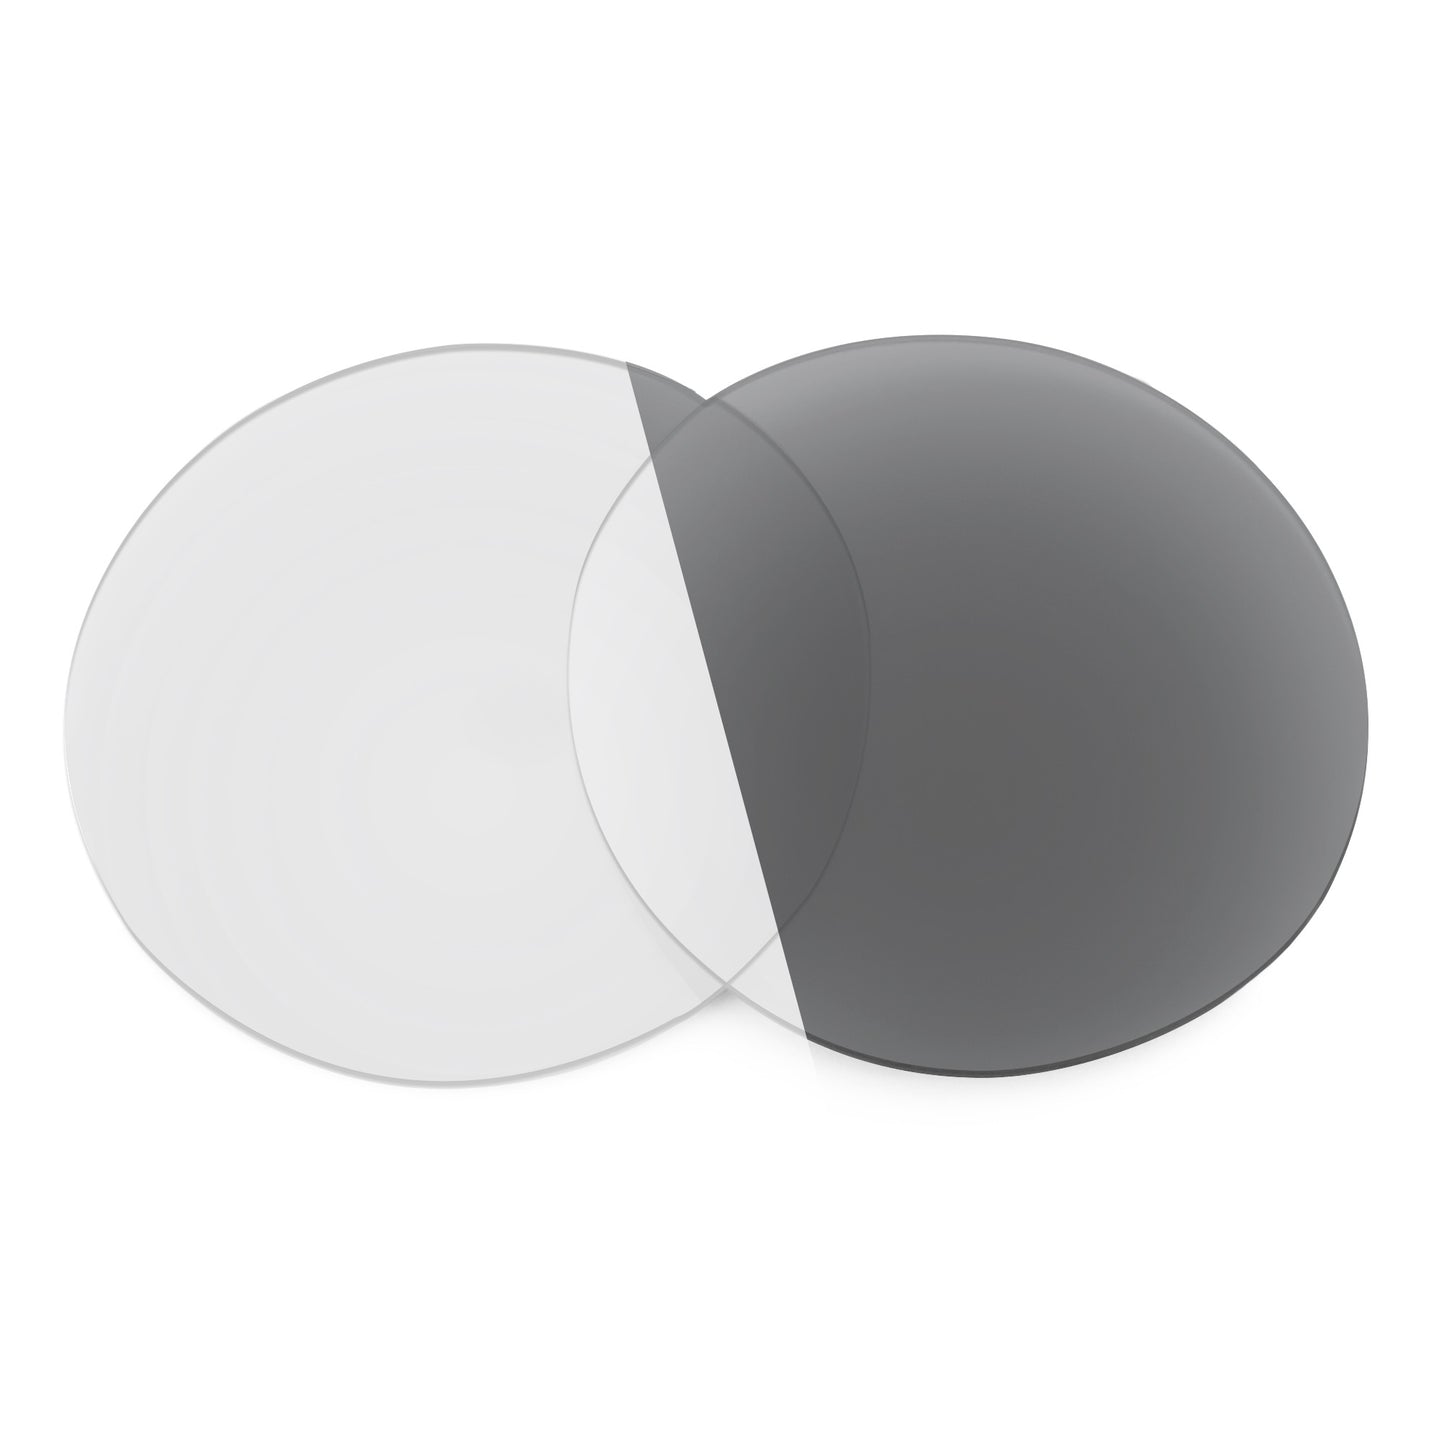 Revant replacement lenses for Ray-Ban RB4277 51mm Non-Polarized Adapt Gray Photochromic